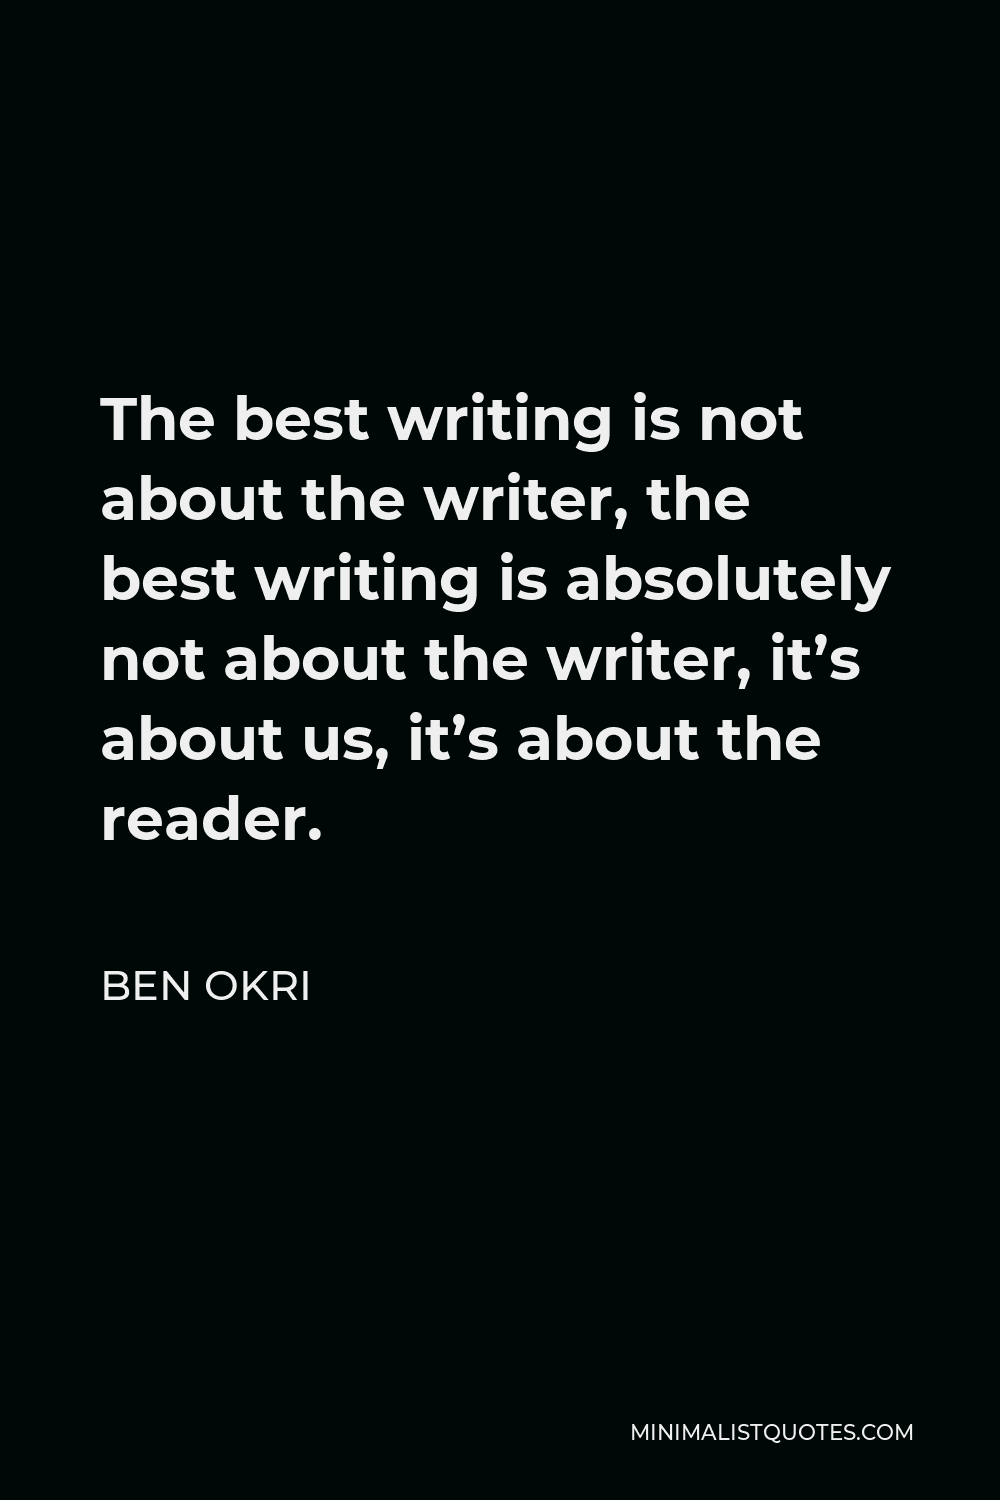 Ben Okri Quote - The best writing is not about the writer, the best writing is absolutely not about the writer, it’s about us, it’s about the reader.